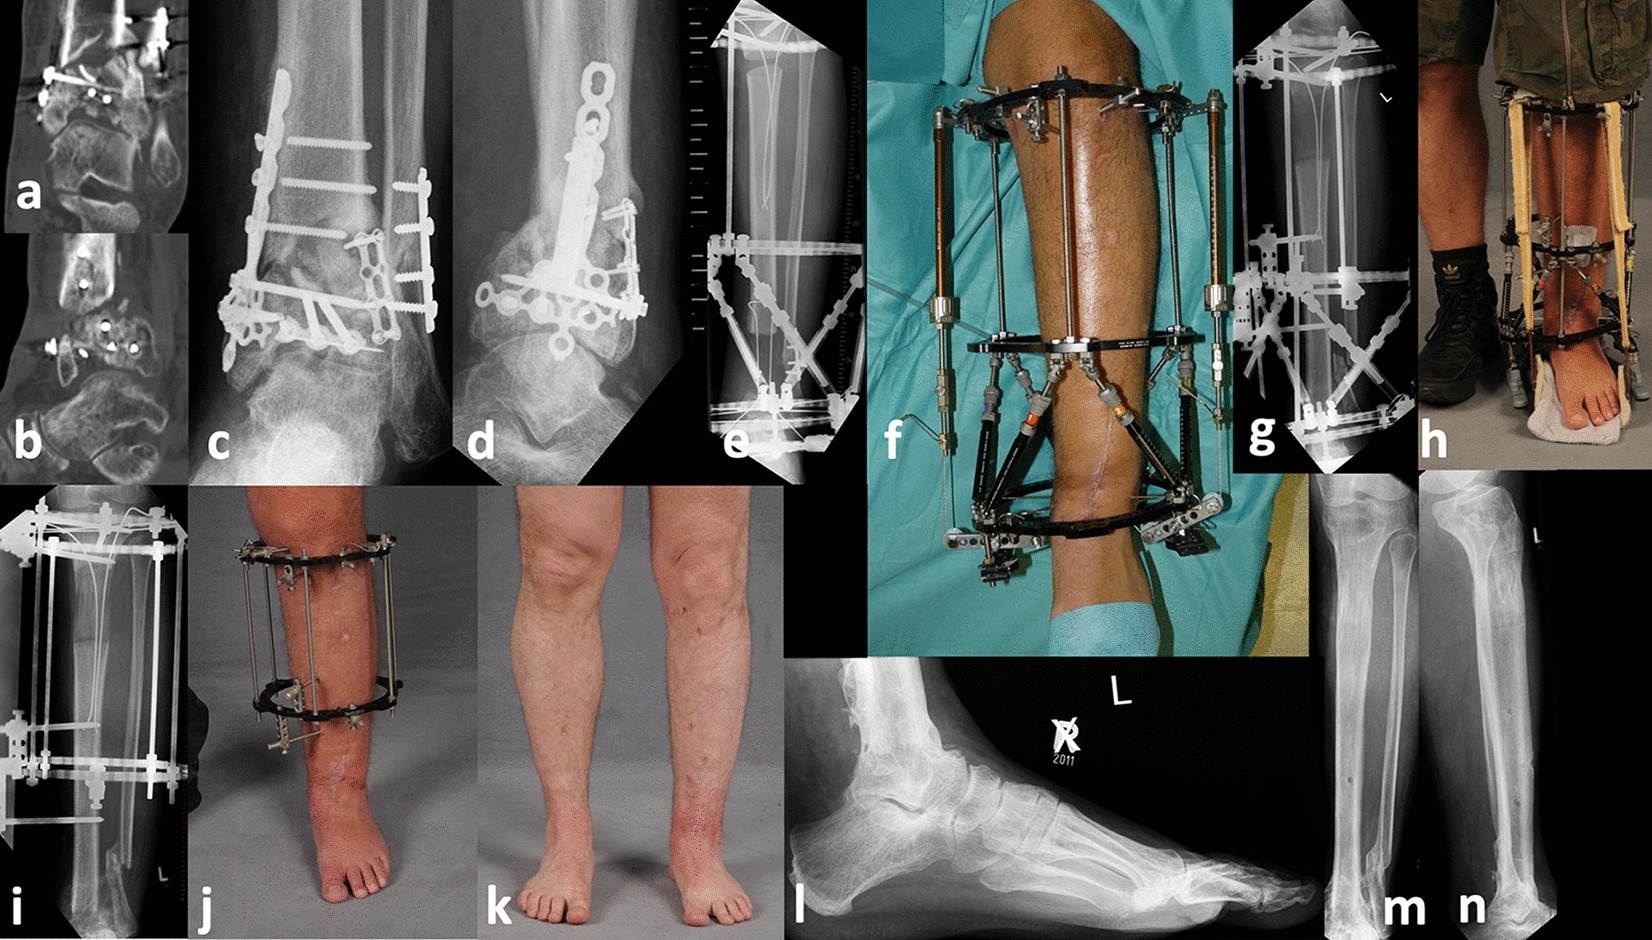 Analysis of bone transport for ankle arthrodesis as a limb salvage